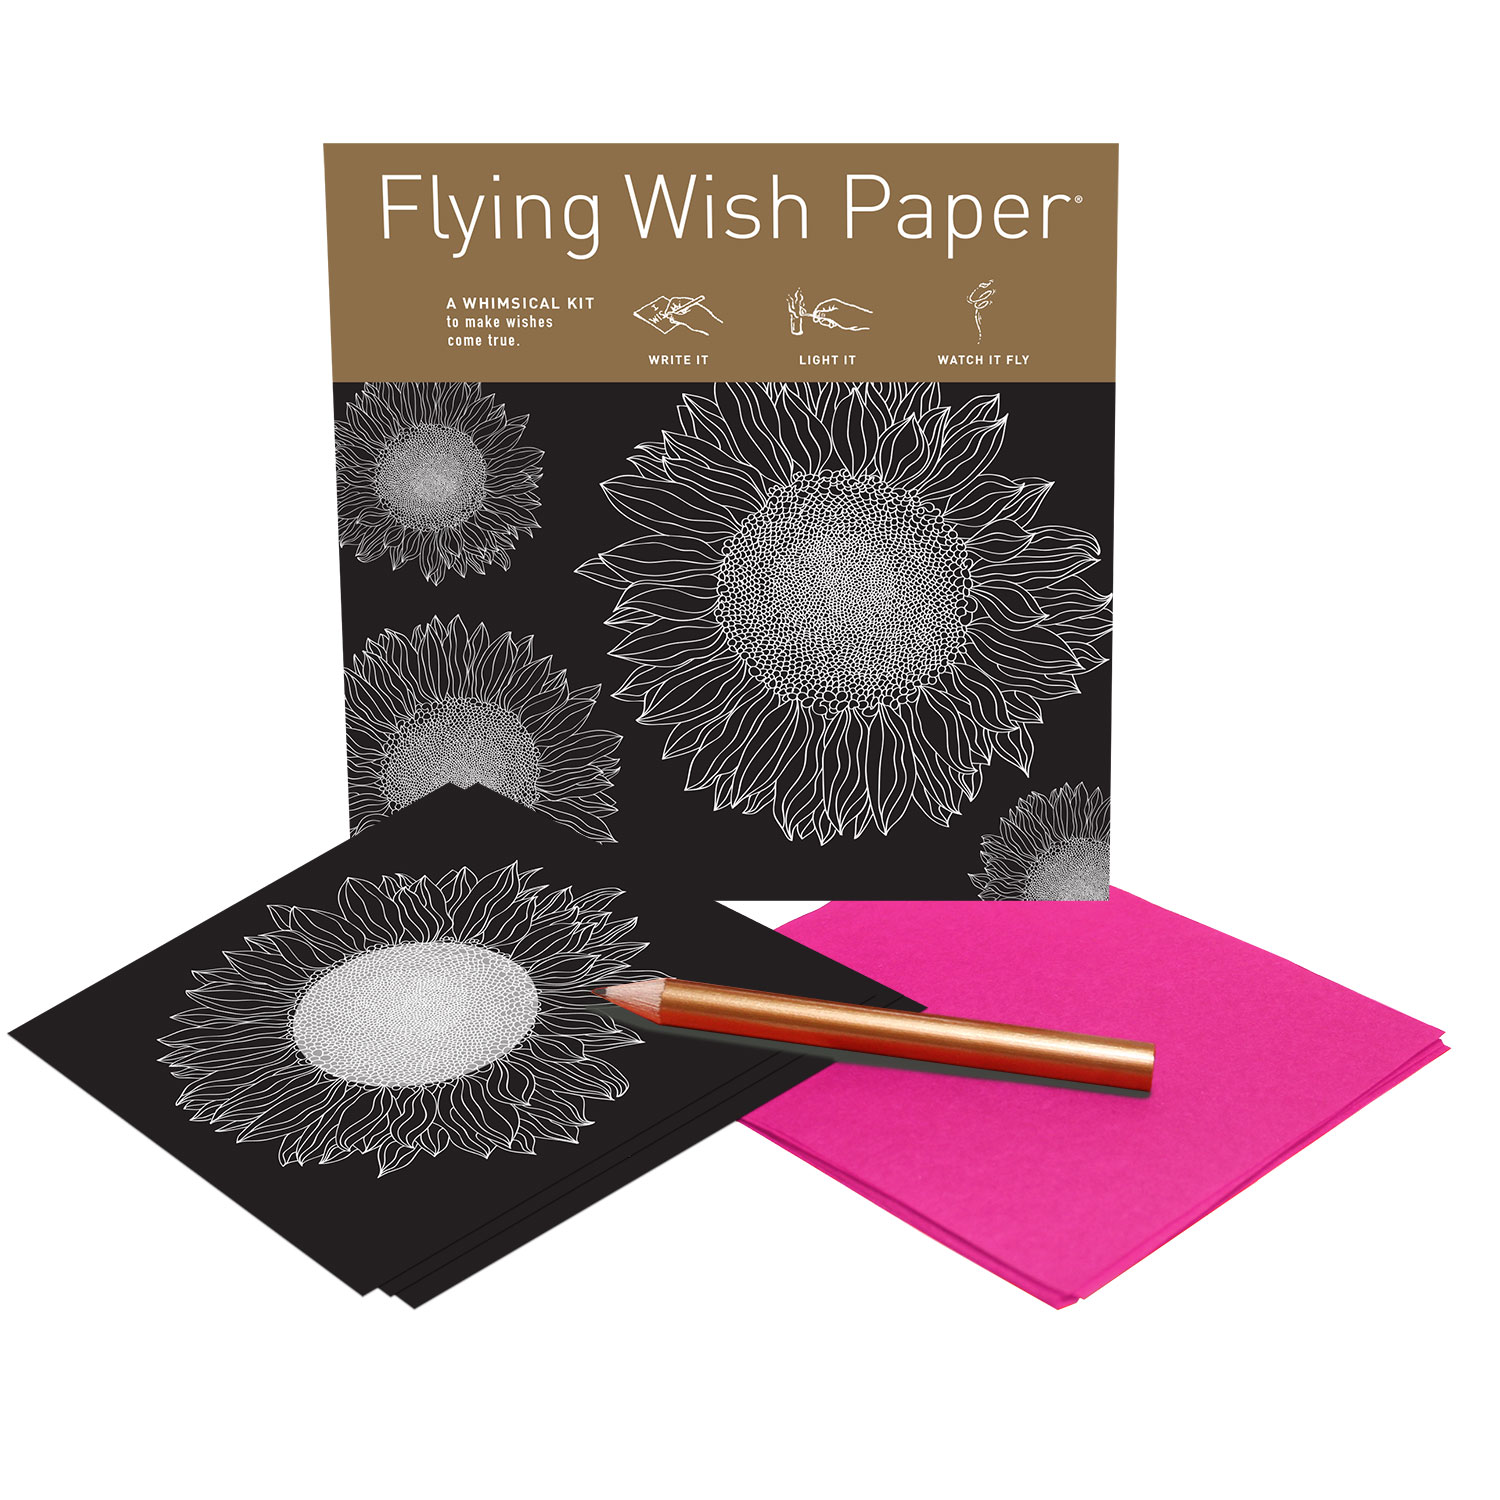 FLYING WISH PAPER MINI KIT W/ 15 WISHES & ACCESSORIES, SUNFLOWERS